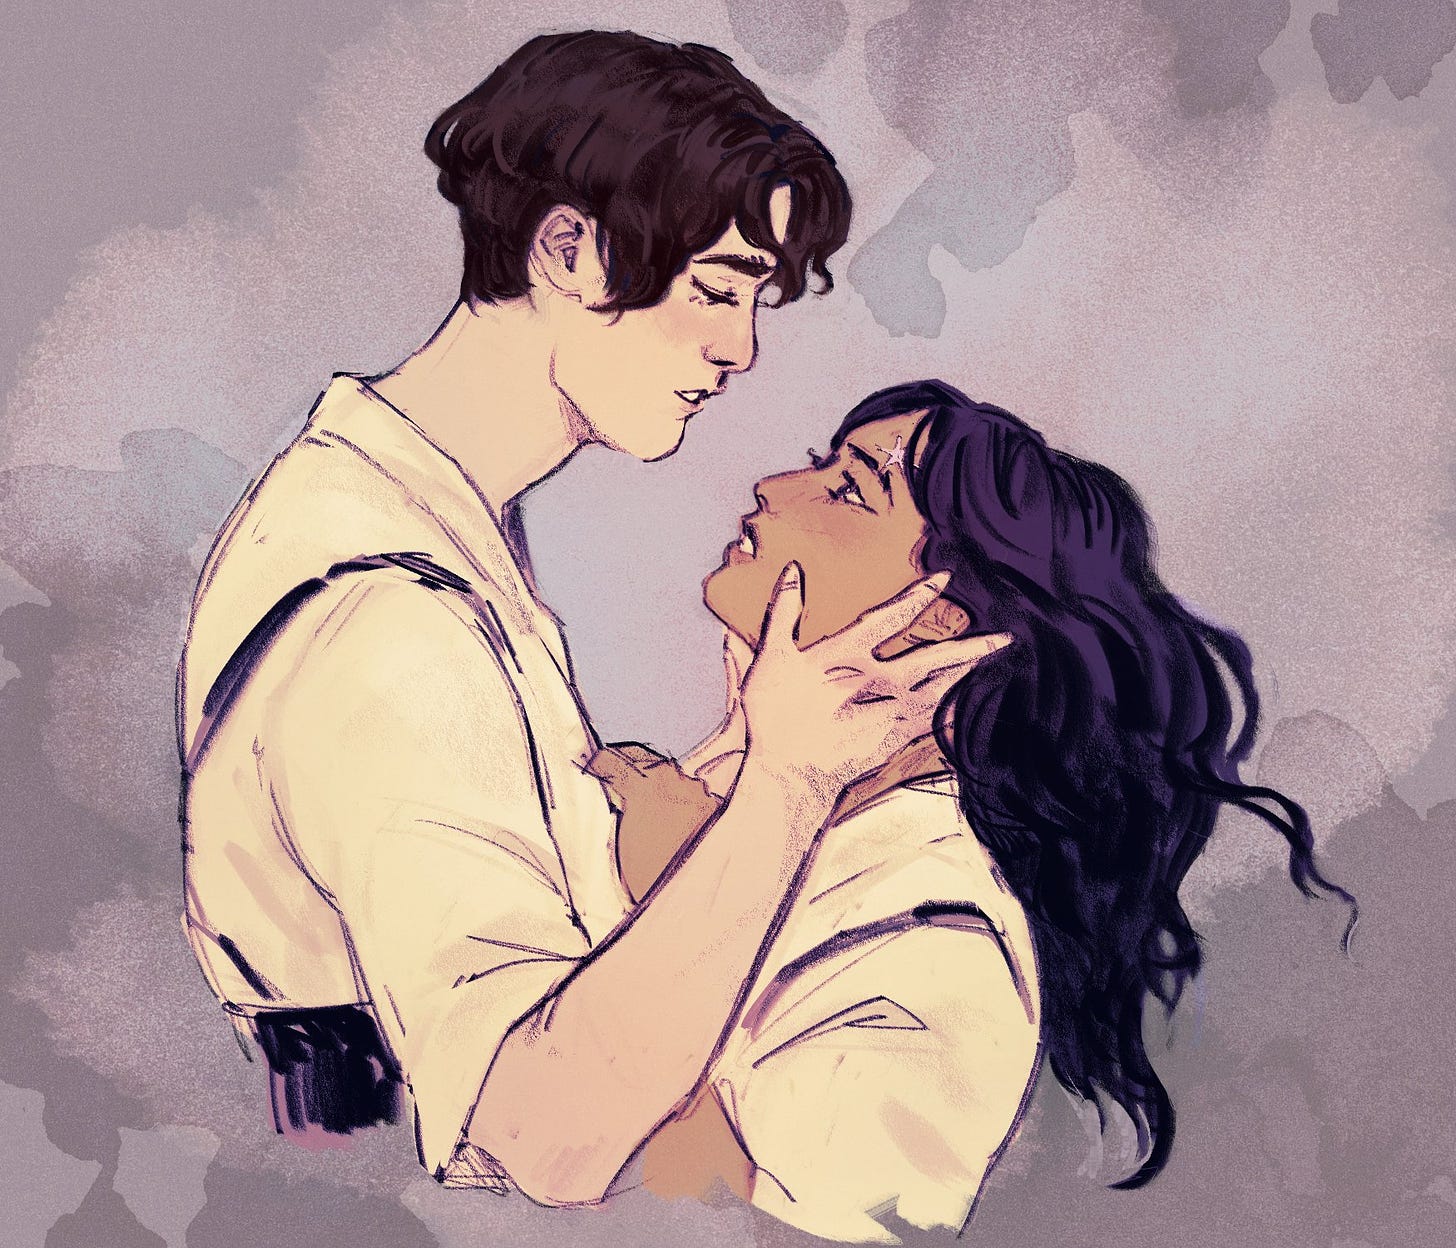 illustrated art of a tall, pale-skinned boy with dark brown hair holding the face of a brown-skinned, East Asian girl with long hair, against a pale lavender background